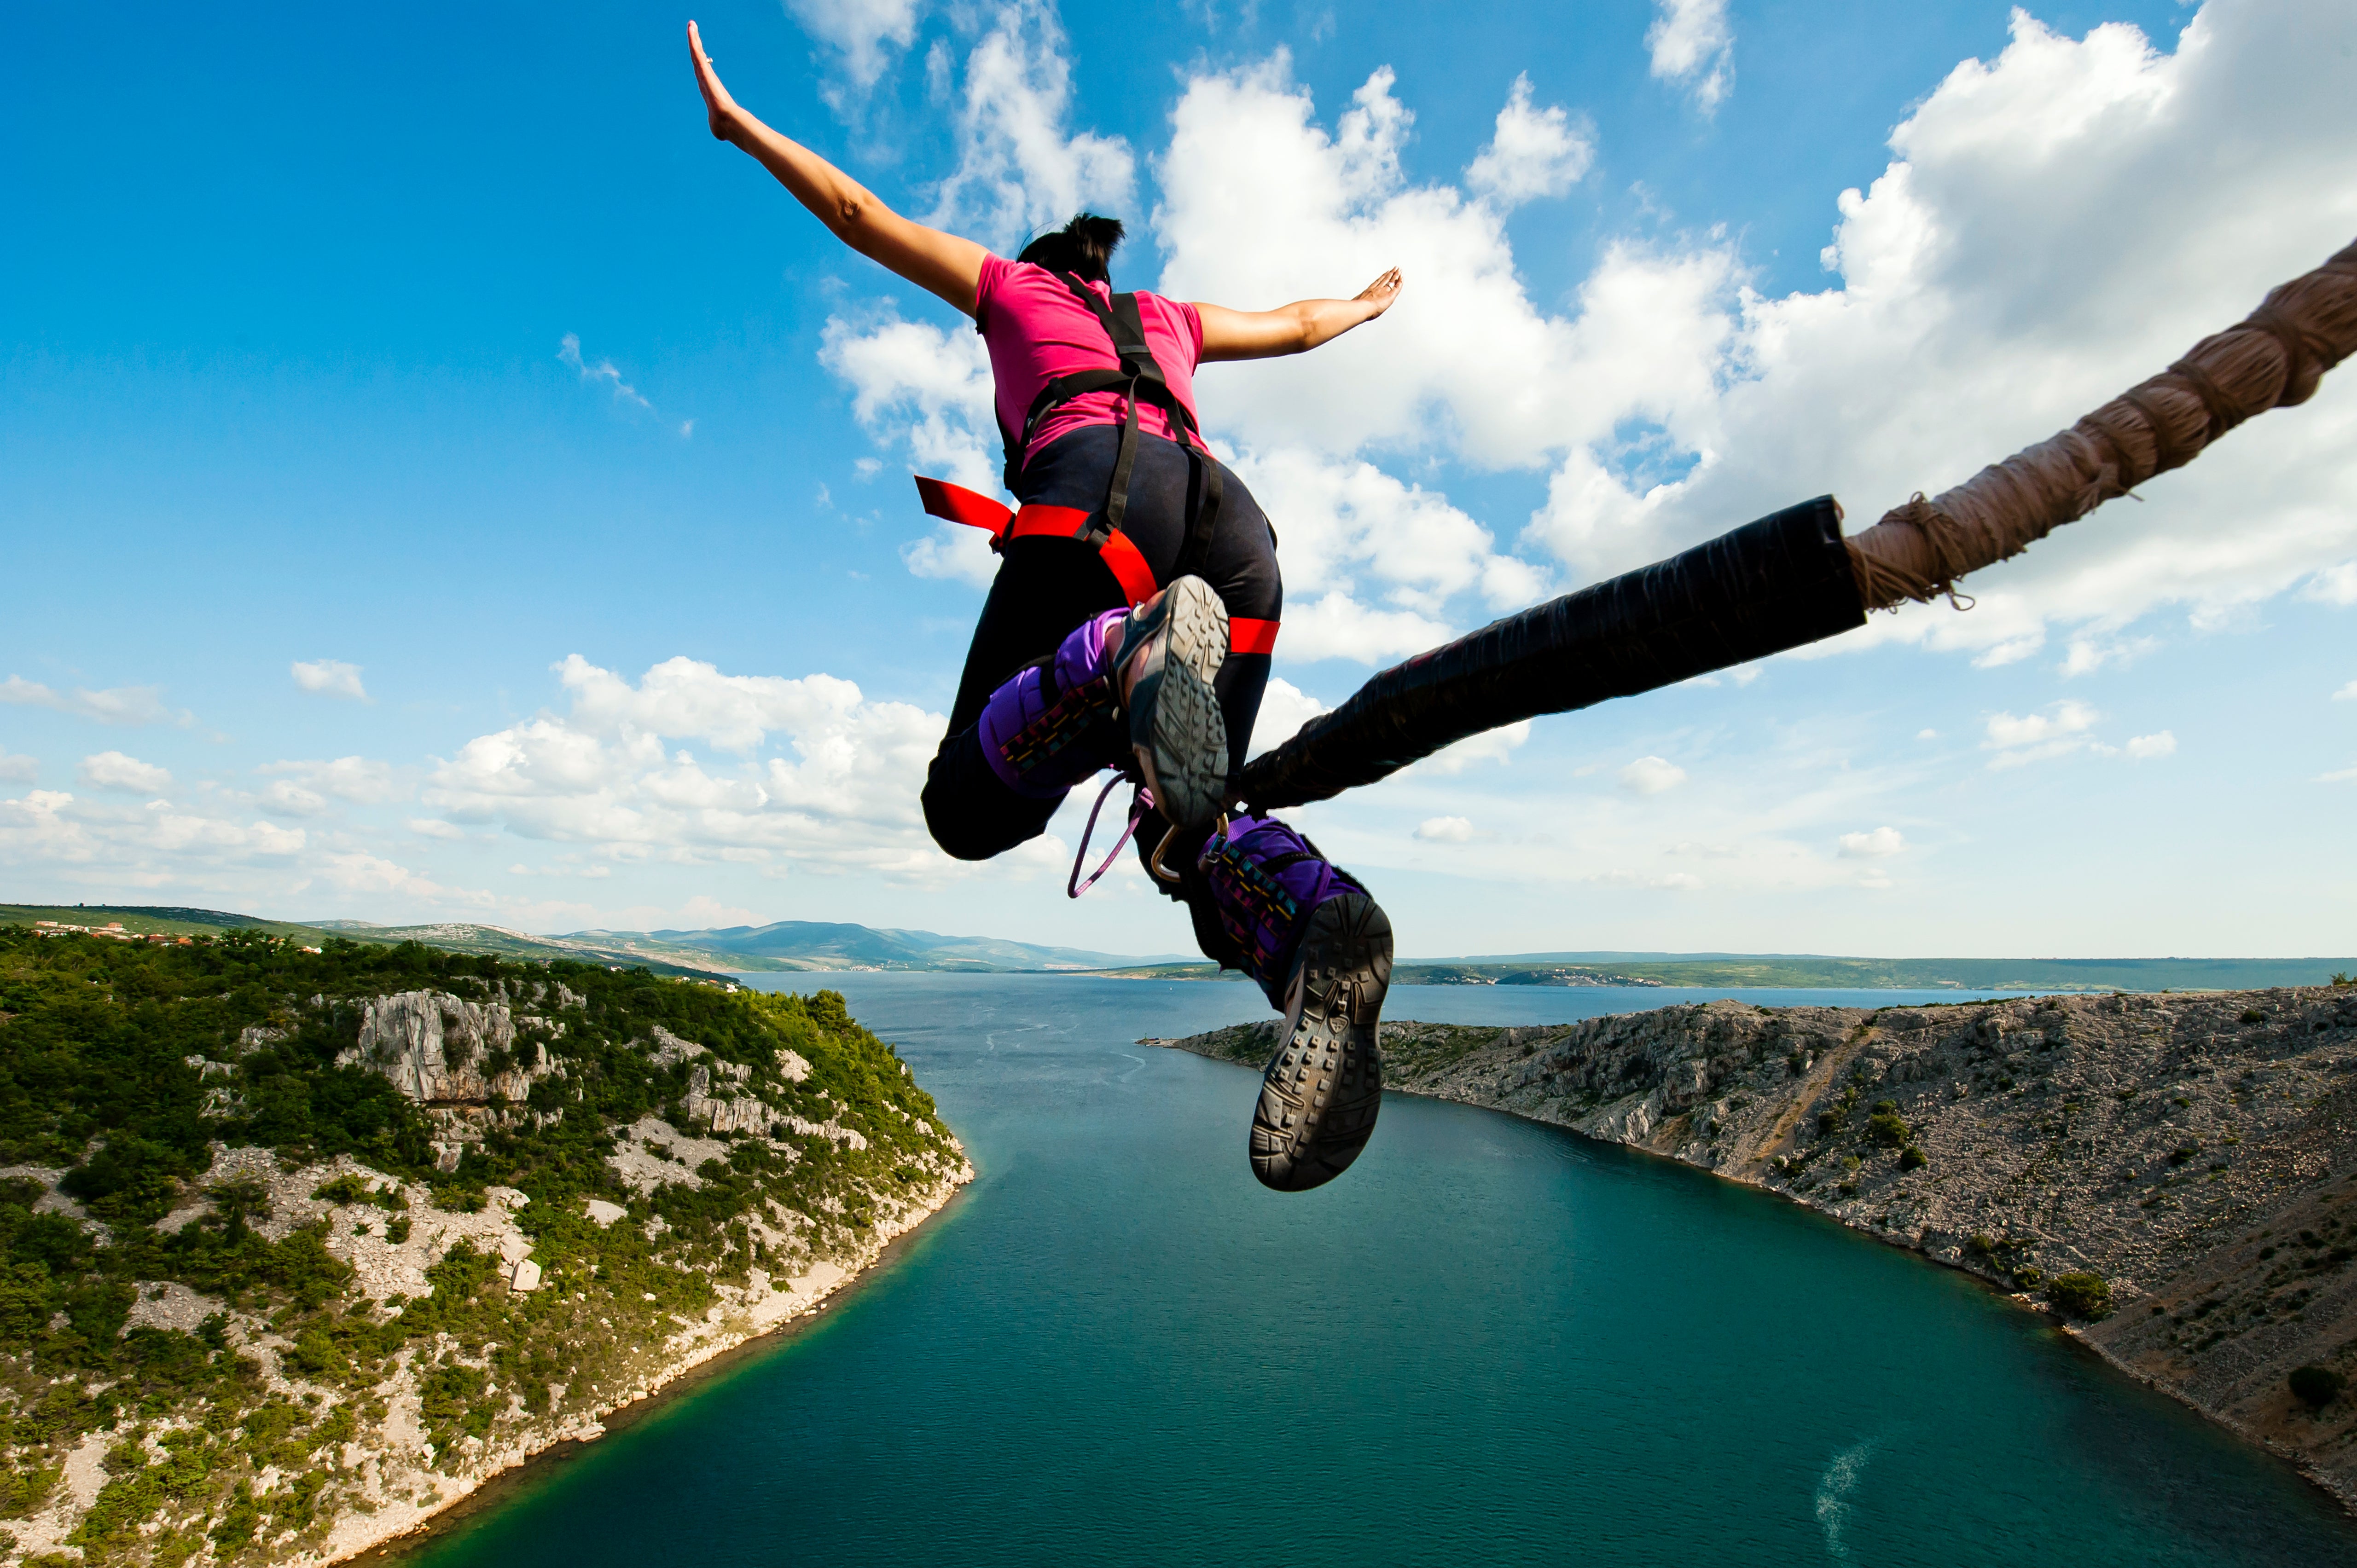 Catch a thrill at Maslenica Bridge, where you can bungee jump between daunting cliffs